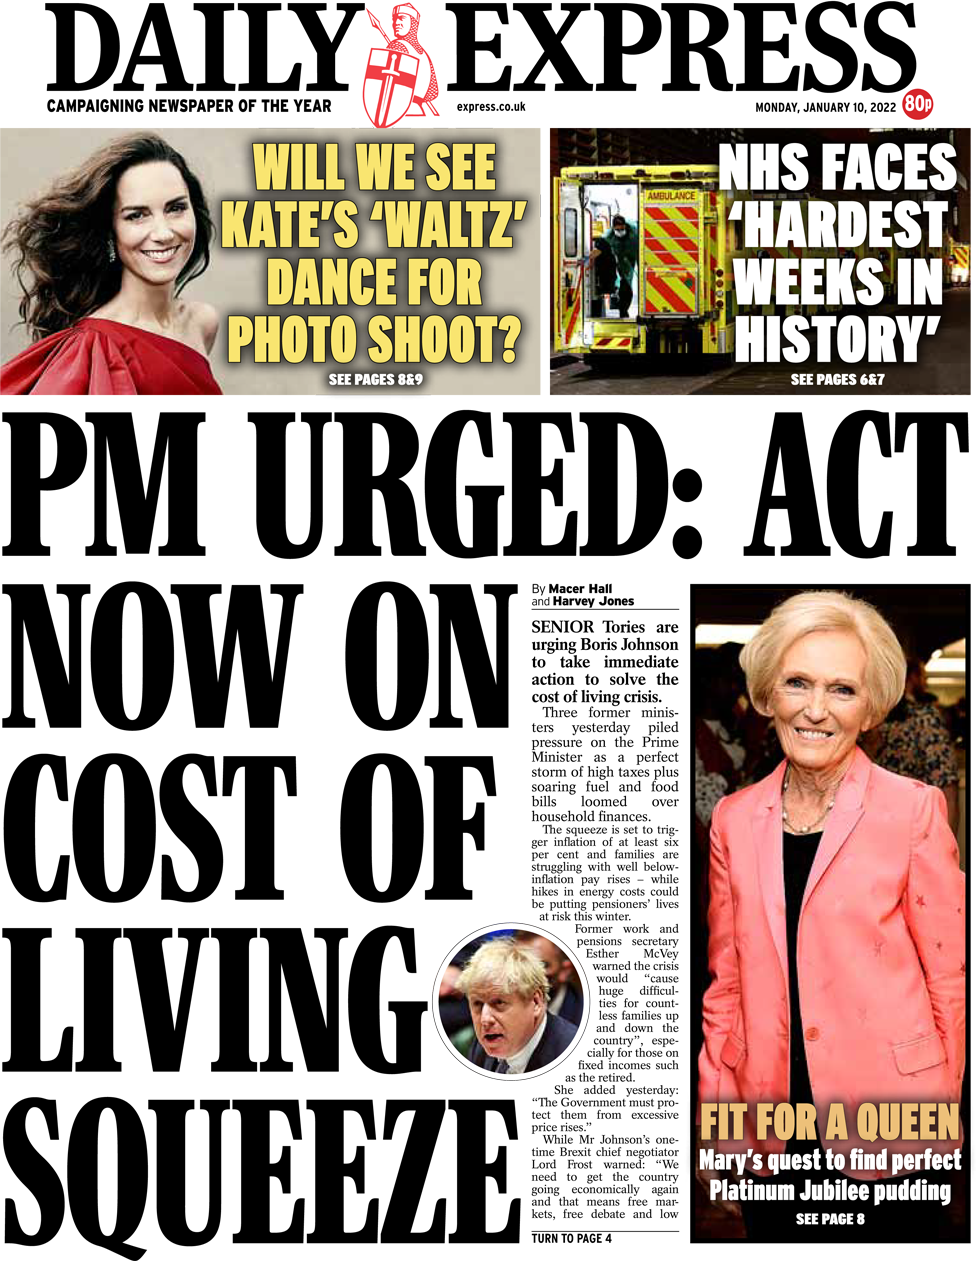 The Daily Express front page 10 January 2022